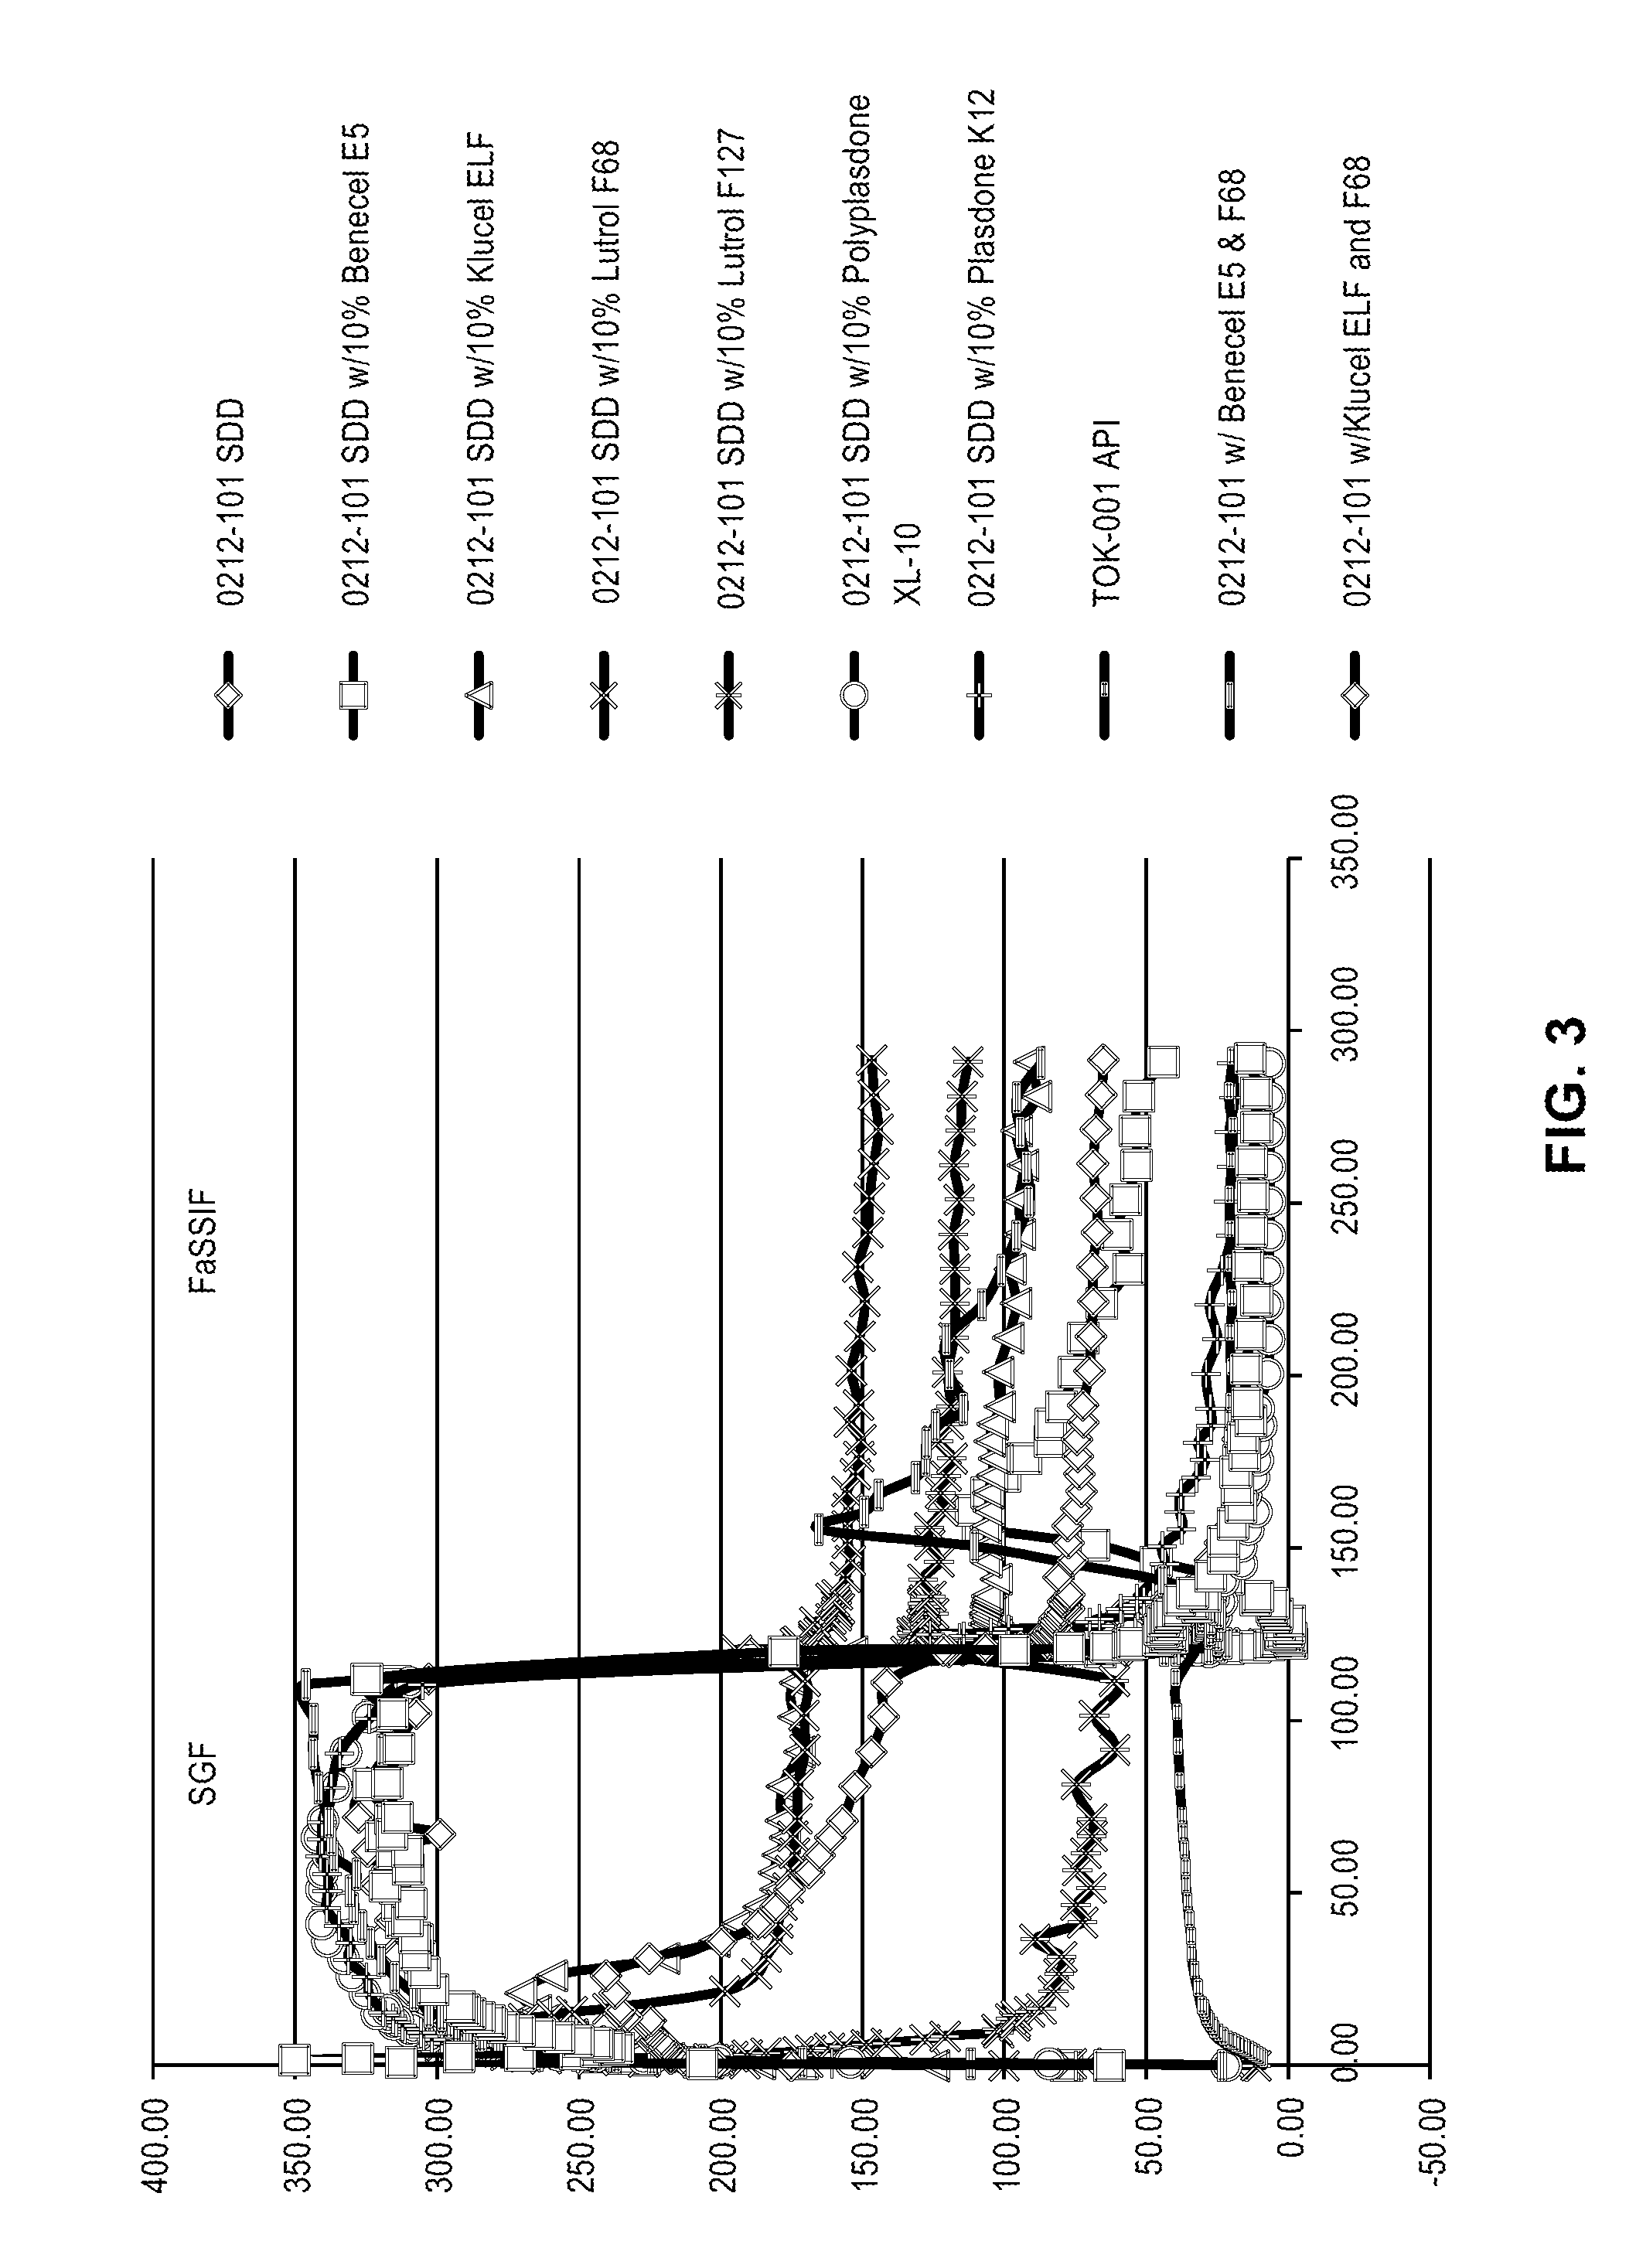 Novel compositions and methods for treating prostate cancer